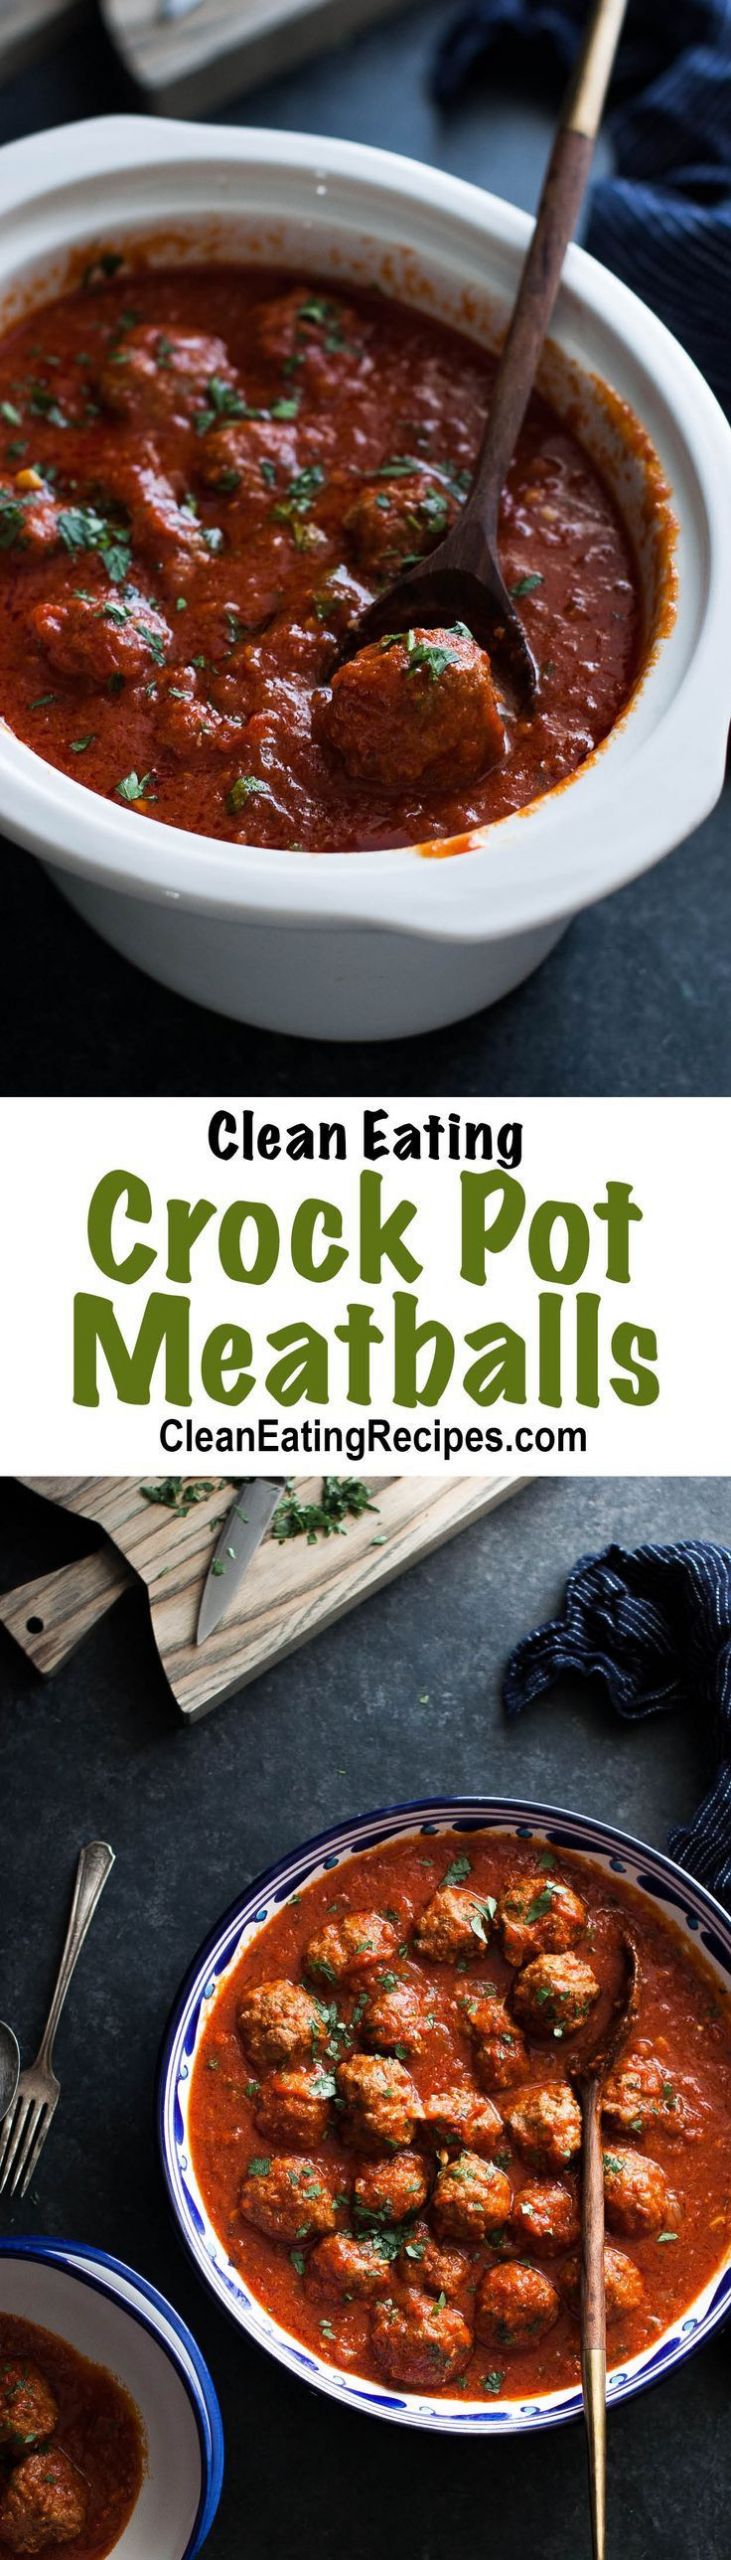 Clean Eating Crock Pot
 Clean Eating Crock Pot Spaghetti Sauce with Meatballs